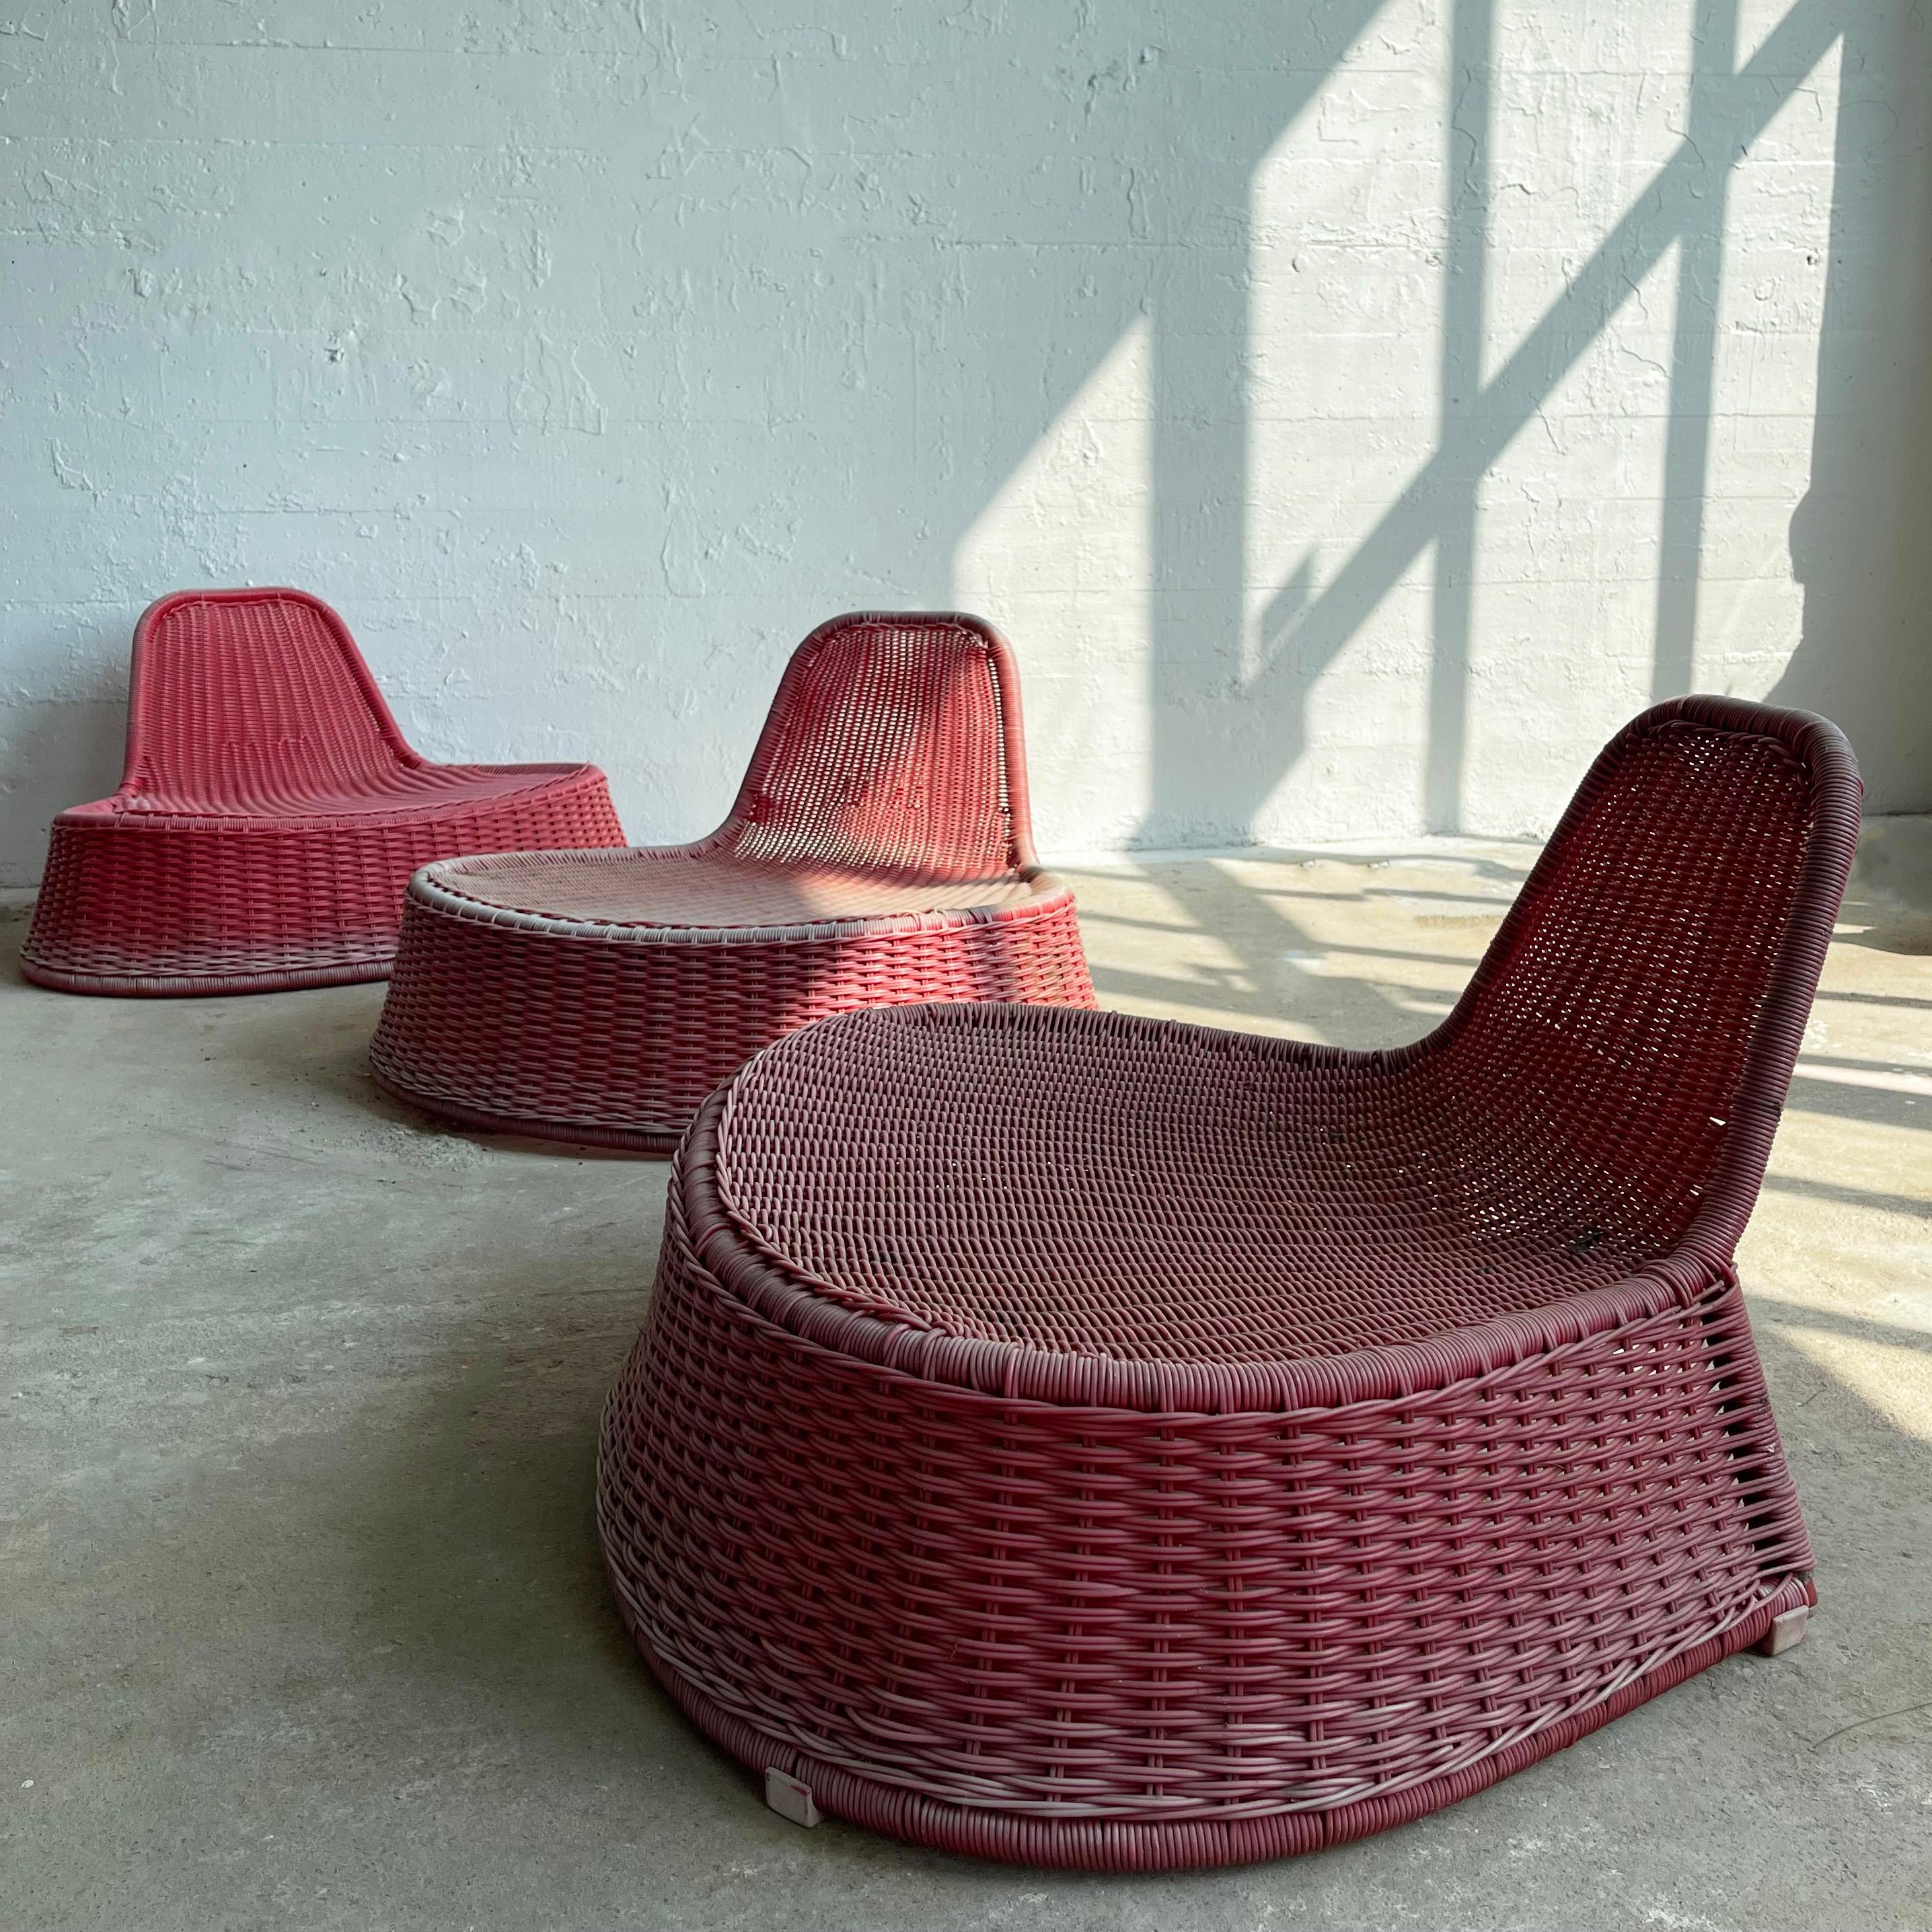 Swedish Pink Woven Outdoor Lounge Chairs By Monika Mulder For Ikea For Sale